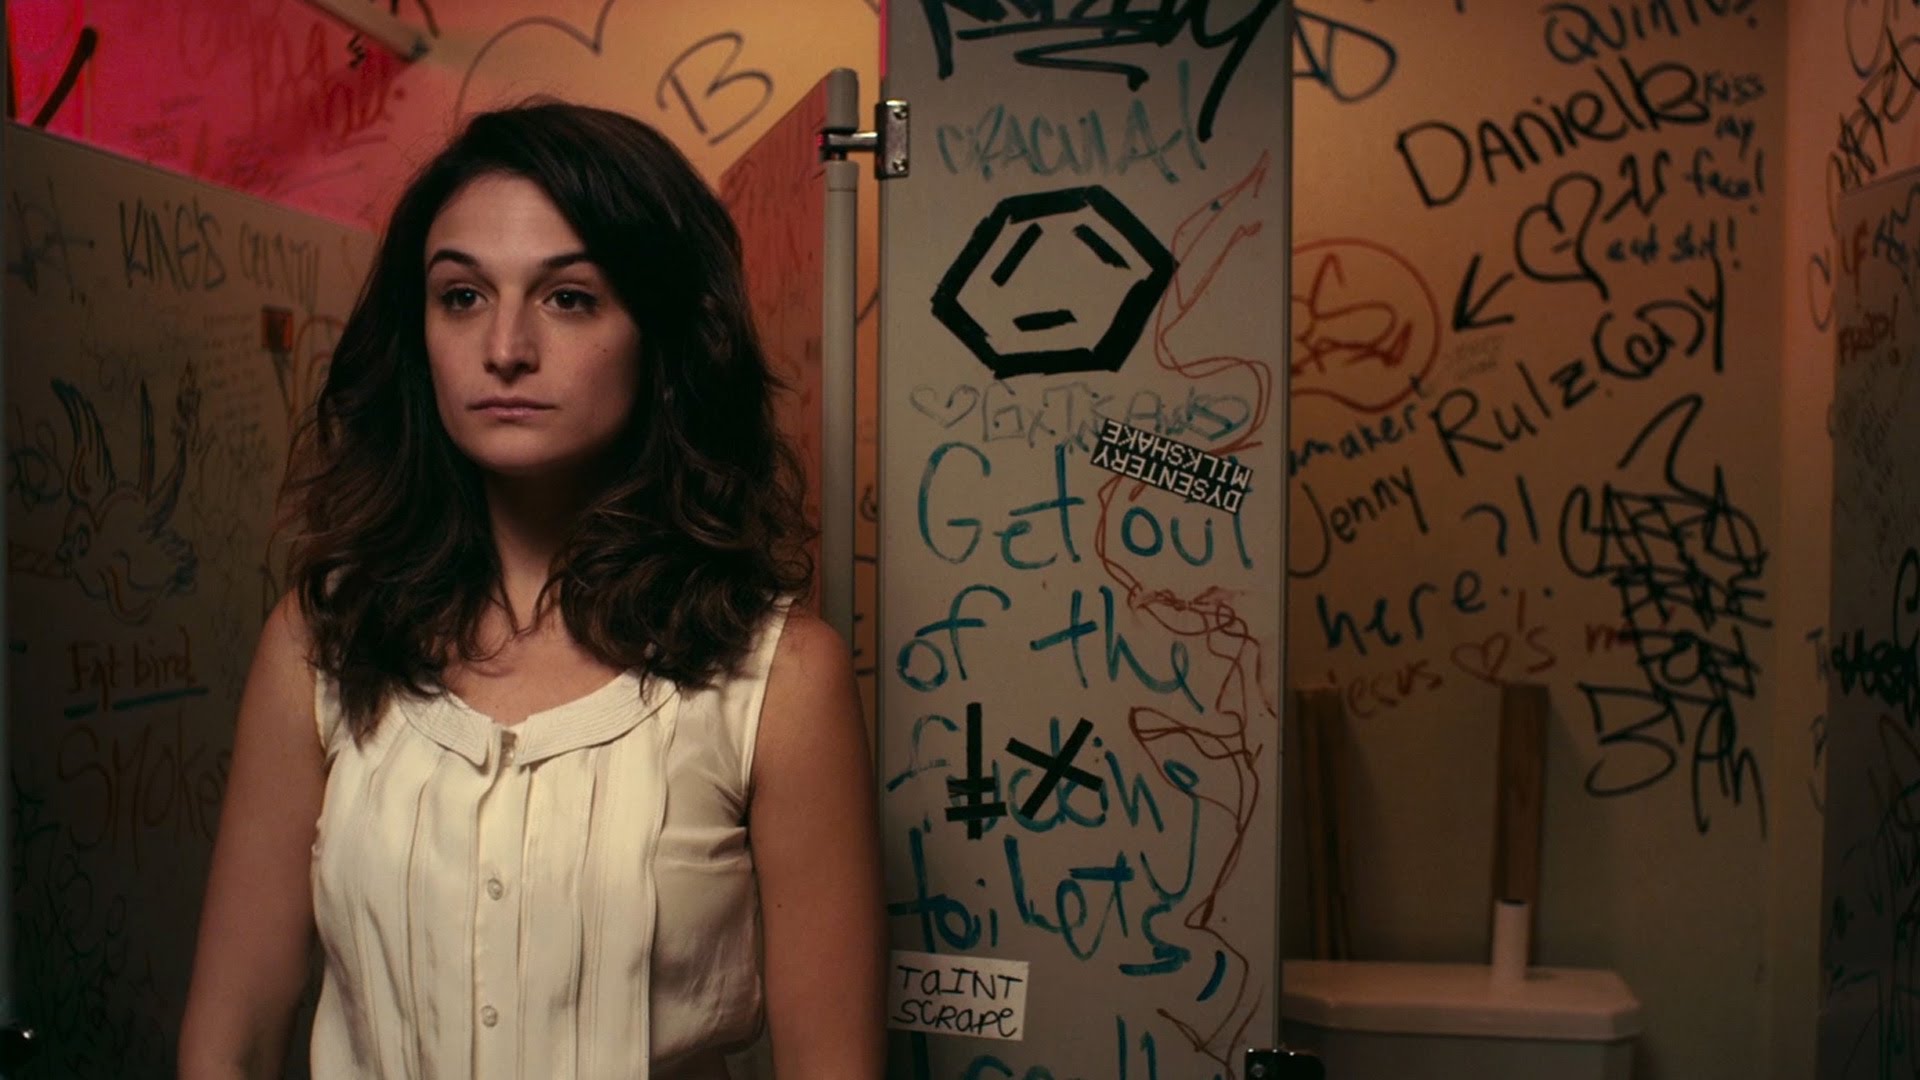 FILM CHAT: Jenny Slate and Gillian Robespierre discuss Obvious Child